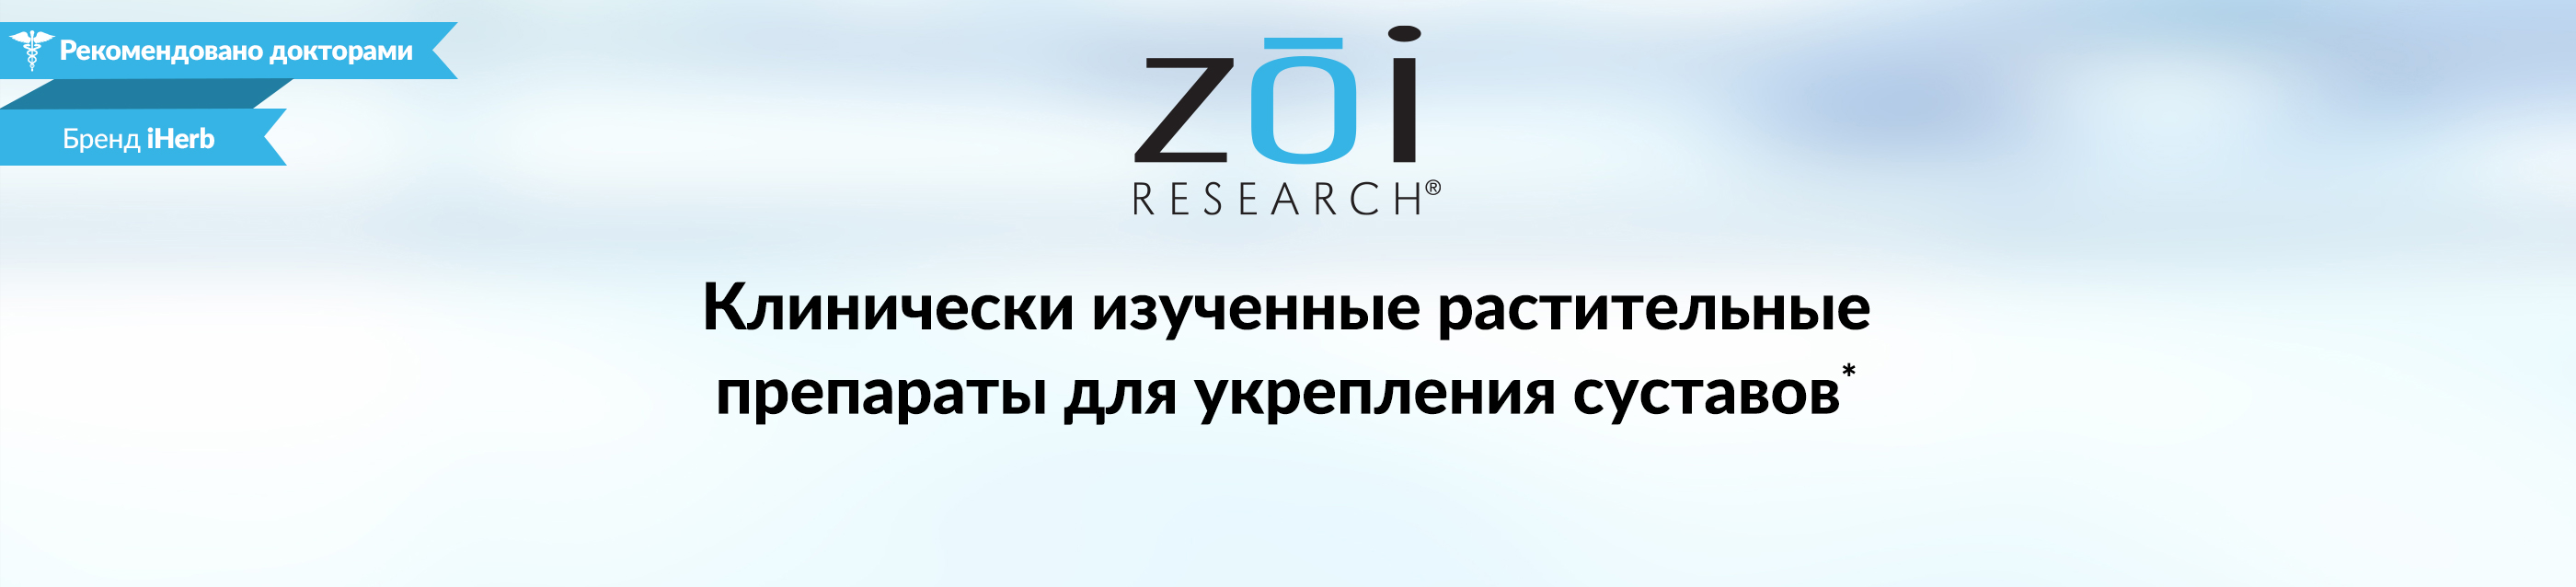 Zoi Research Joint Health